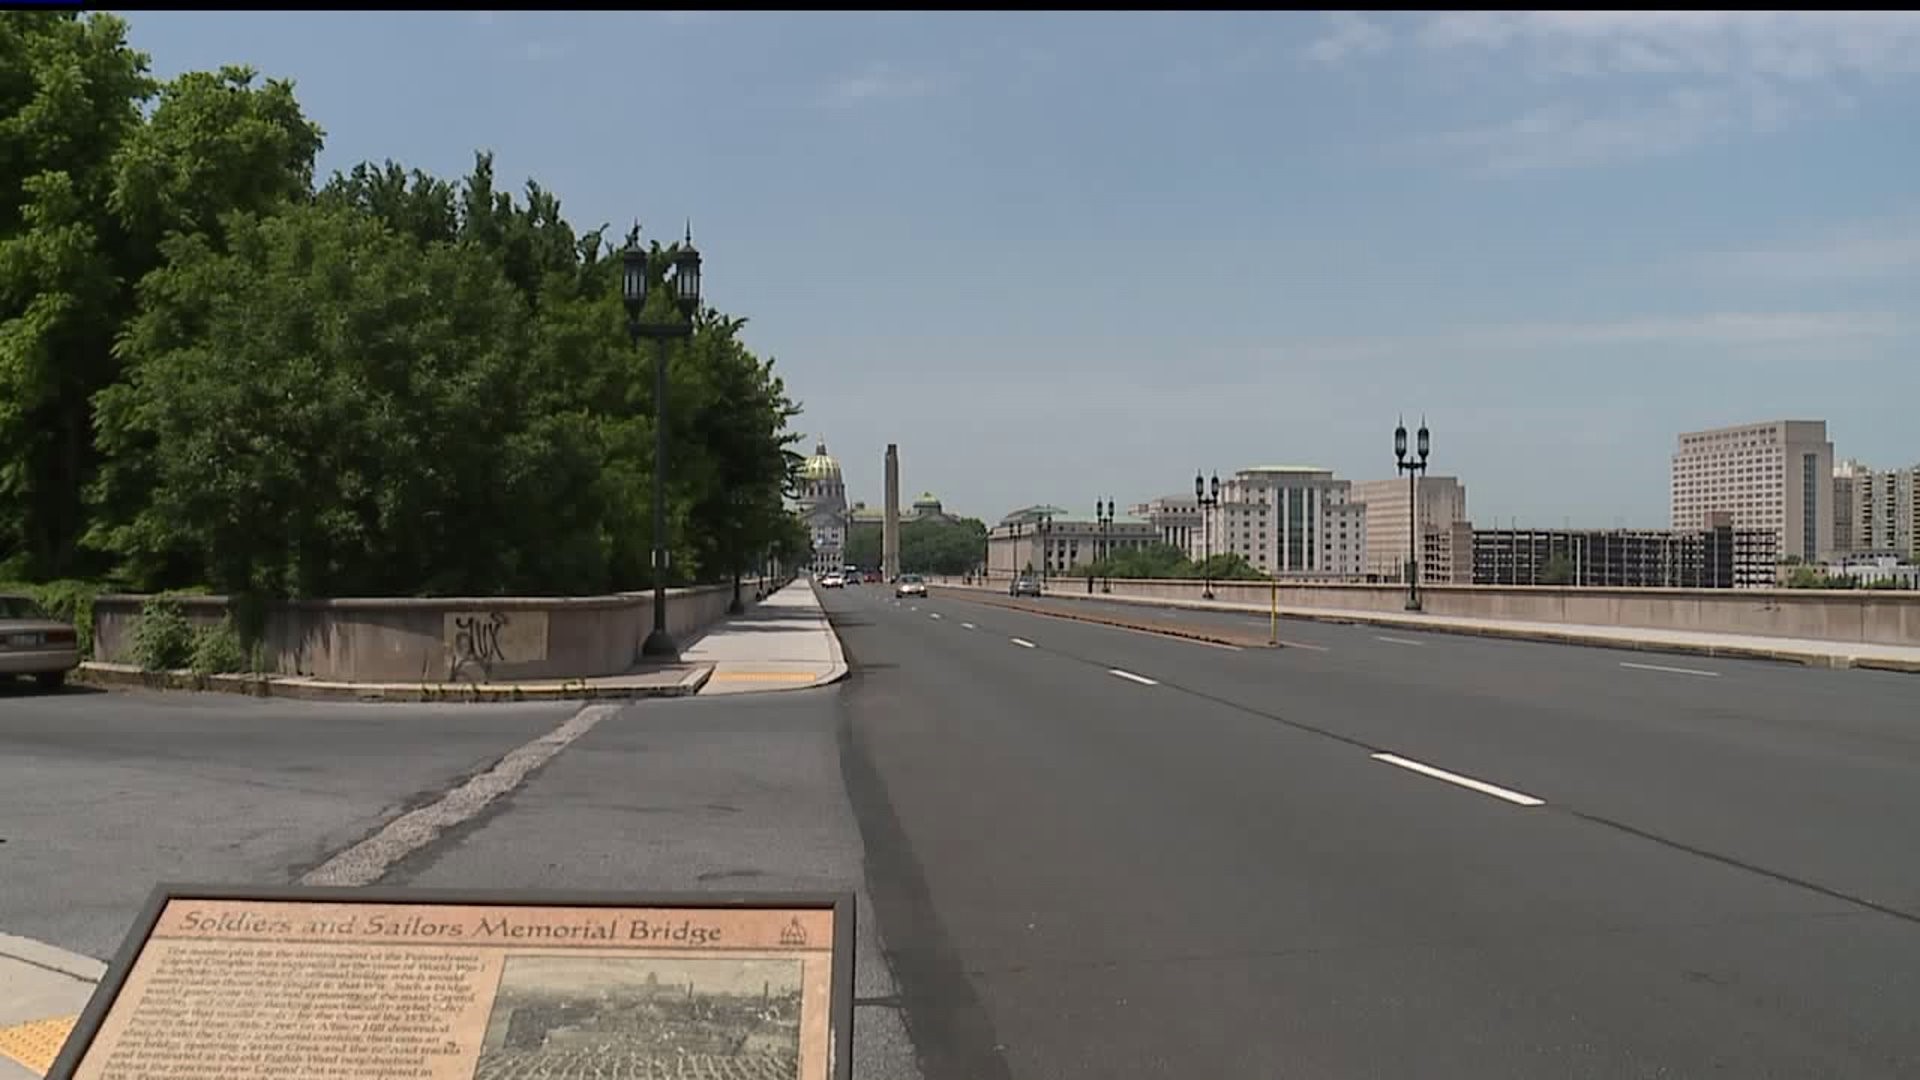 A woman is dead after a hit-and-run crash on State Street Bridge in Harrisburg